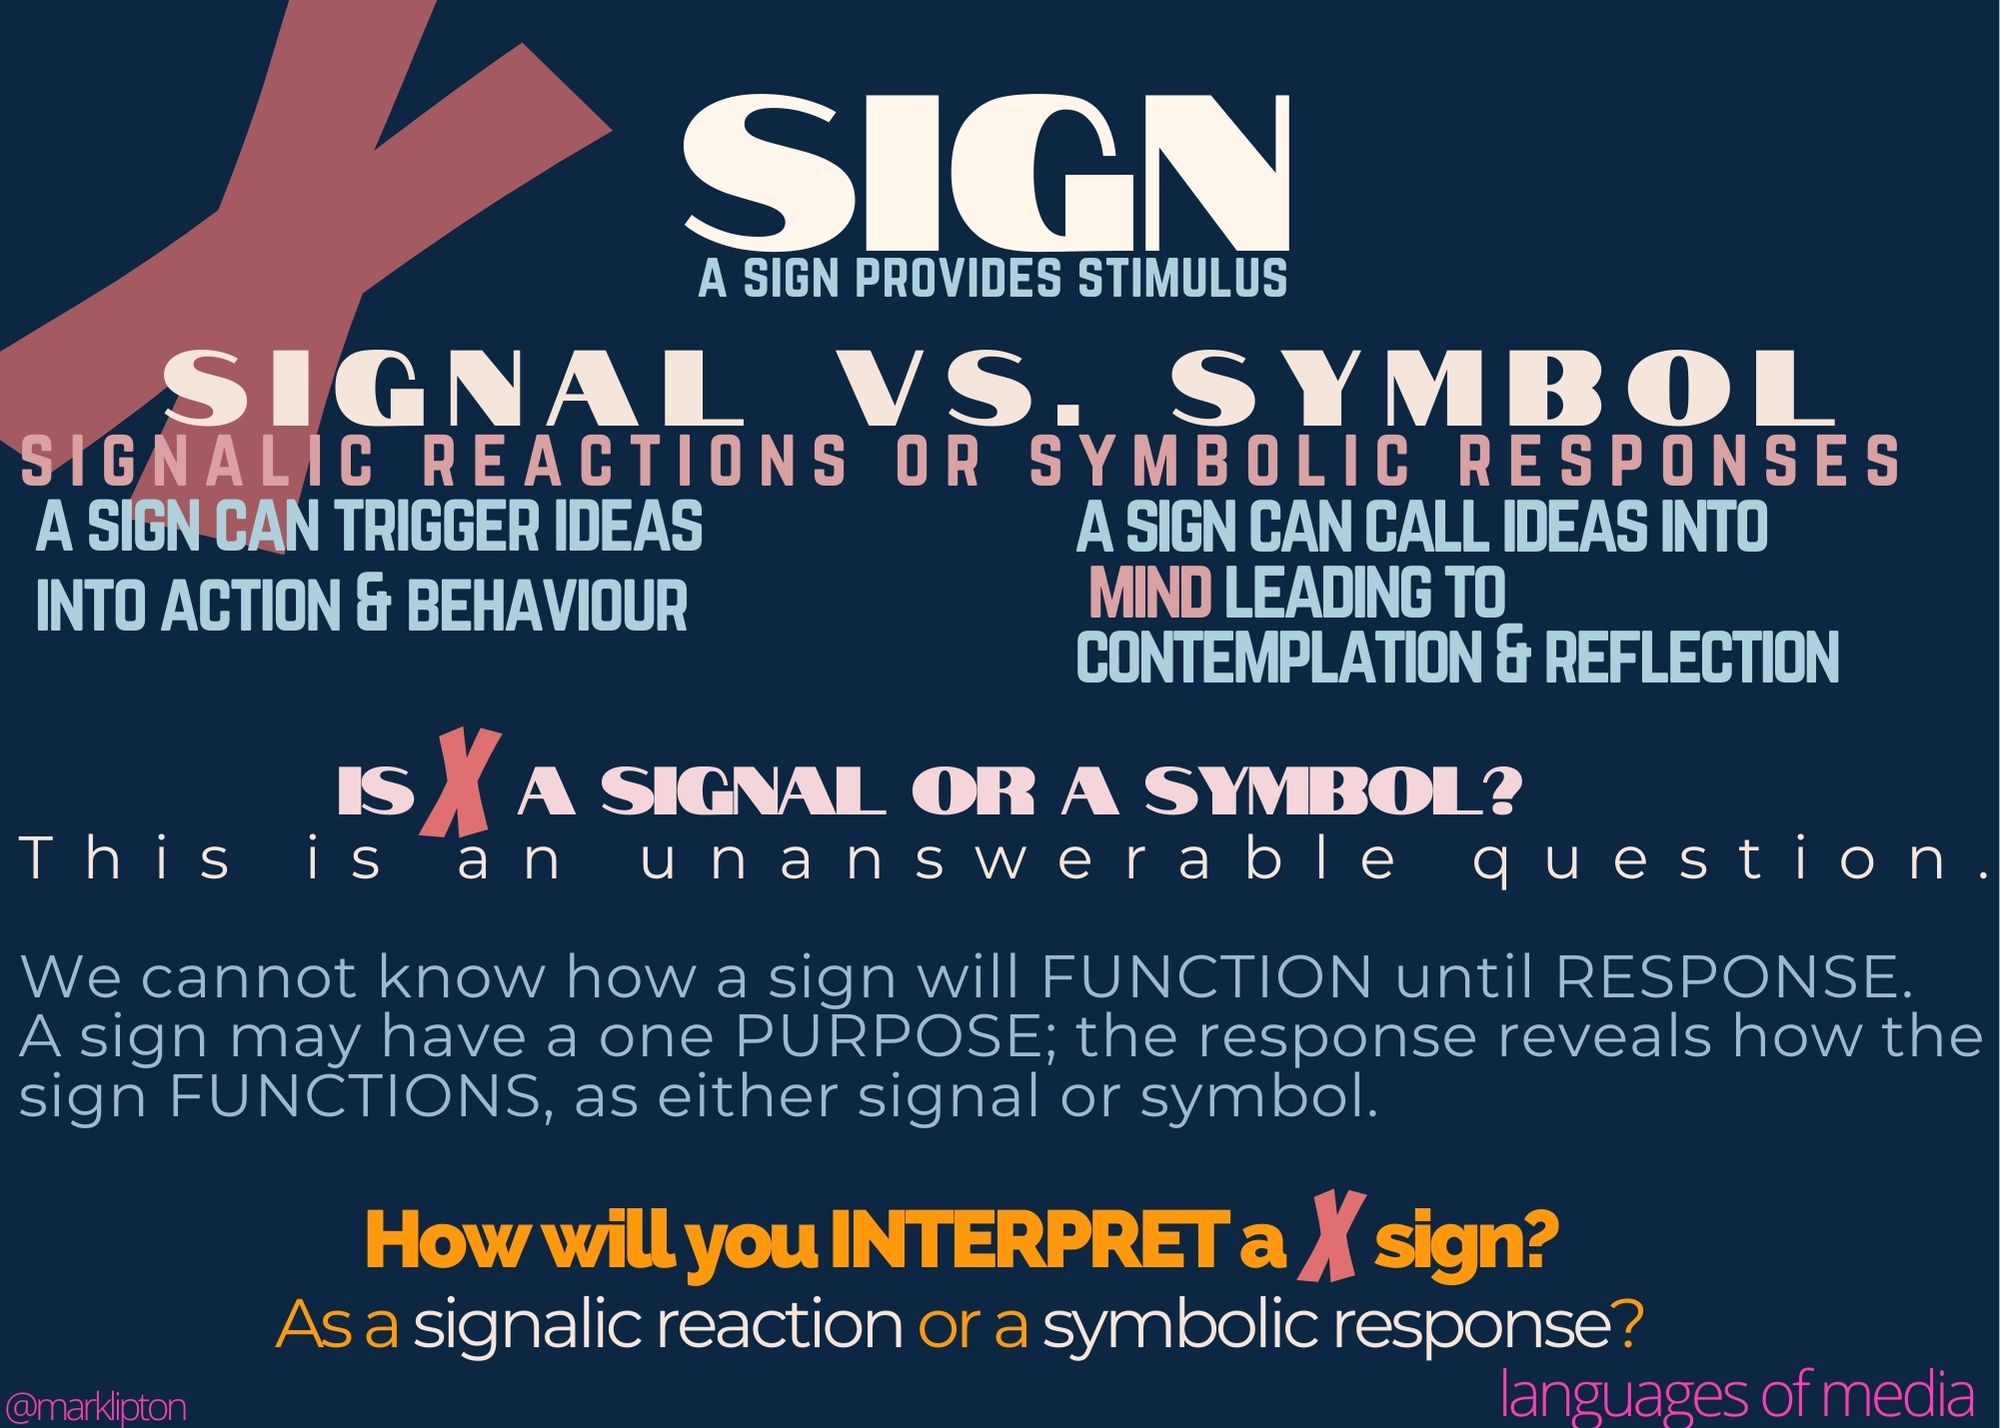 image: AltText: Sign X; a sign provides stimulus; SIGNAL vs. SYMBOL; signalic reactions or symbolic responses; a sign can trigger ideas into action & behaviour; a sign can call ideas into mind leading to contemplation & reflection; Is X a signal or a symbol? This is an unanswerable question. We cannot know how a sign will FUNCTION until RESPONSE. A sign may have a one PURPOSE; the response reveals how the sign FUNCTIONS, as either signal or symbol. How will you INTERPRET a X sign? As a signalic reaction or a symbolic response?